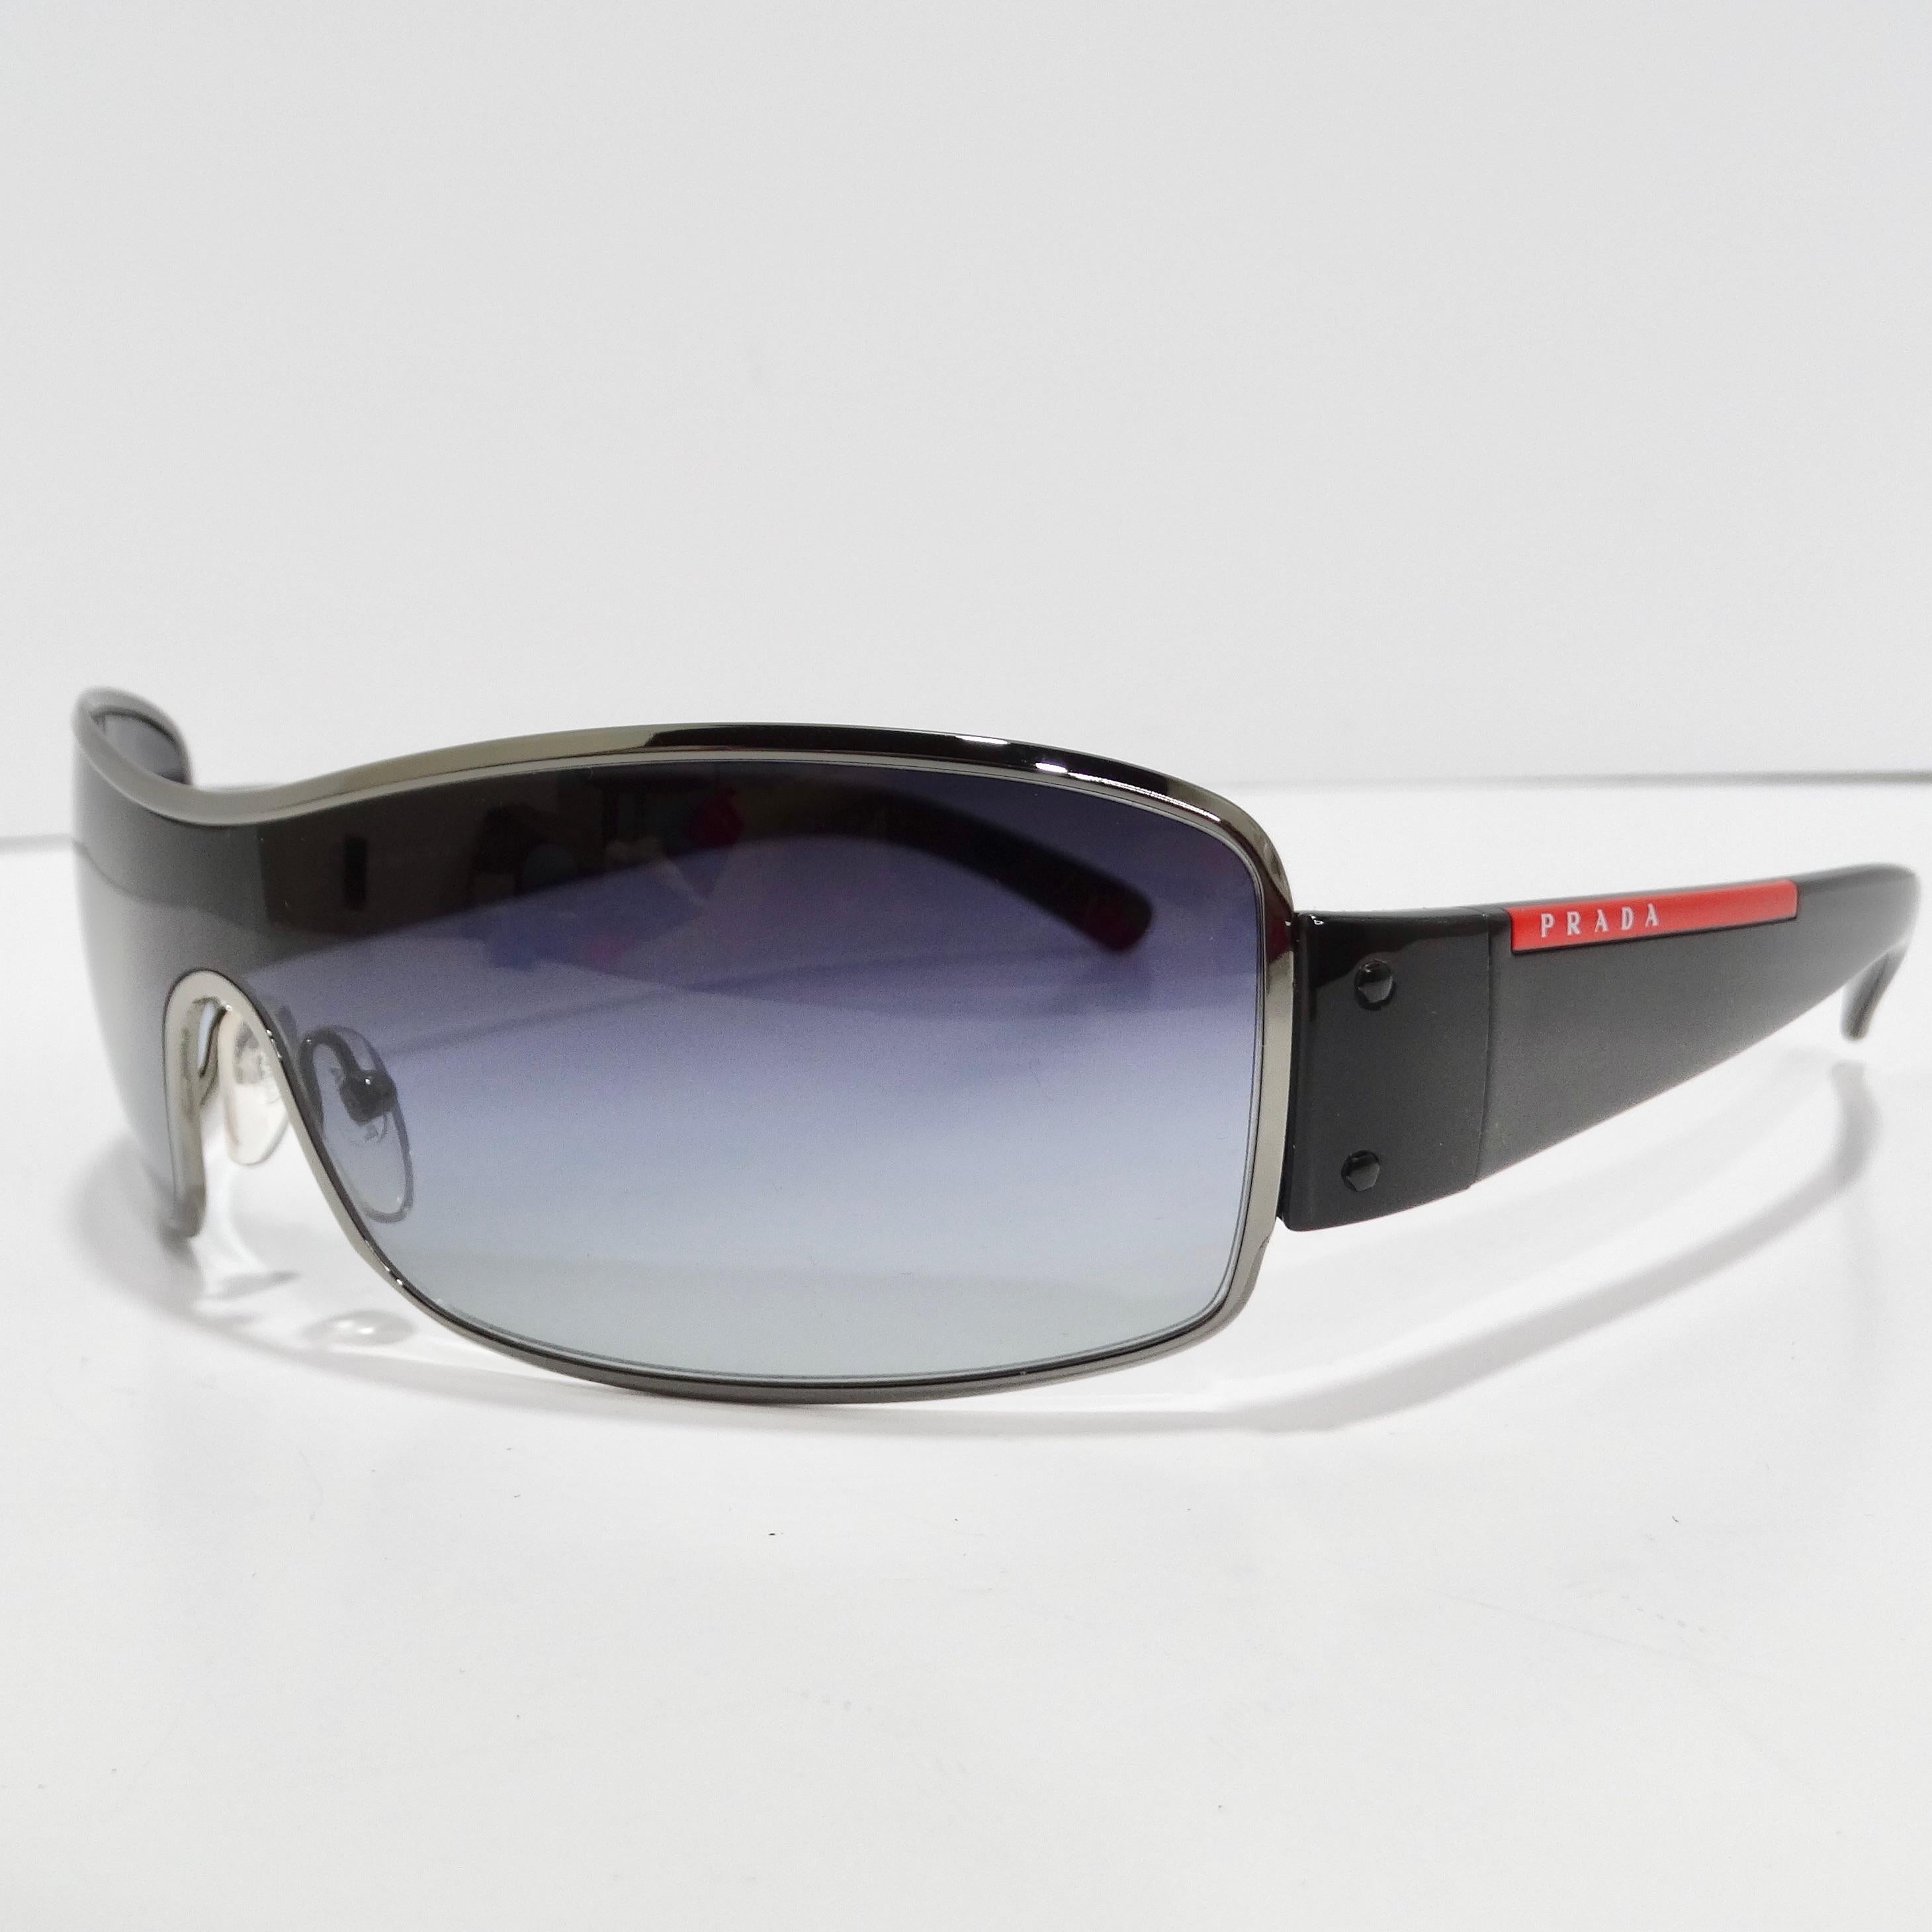 Step into the epitome of 1990s style with the Prada 1990s Silver Tone Shield Sunglasses. These classic shield-style sunglasses boast thin silver-tone rims, sleek black arms adorned with a red Prada logo, and stylish blue gradient lenses. The